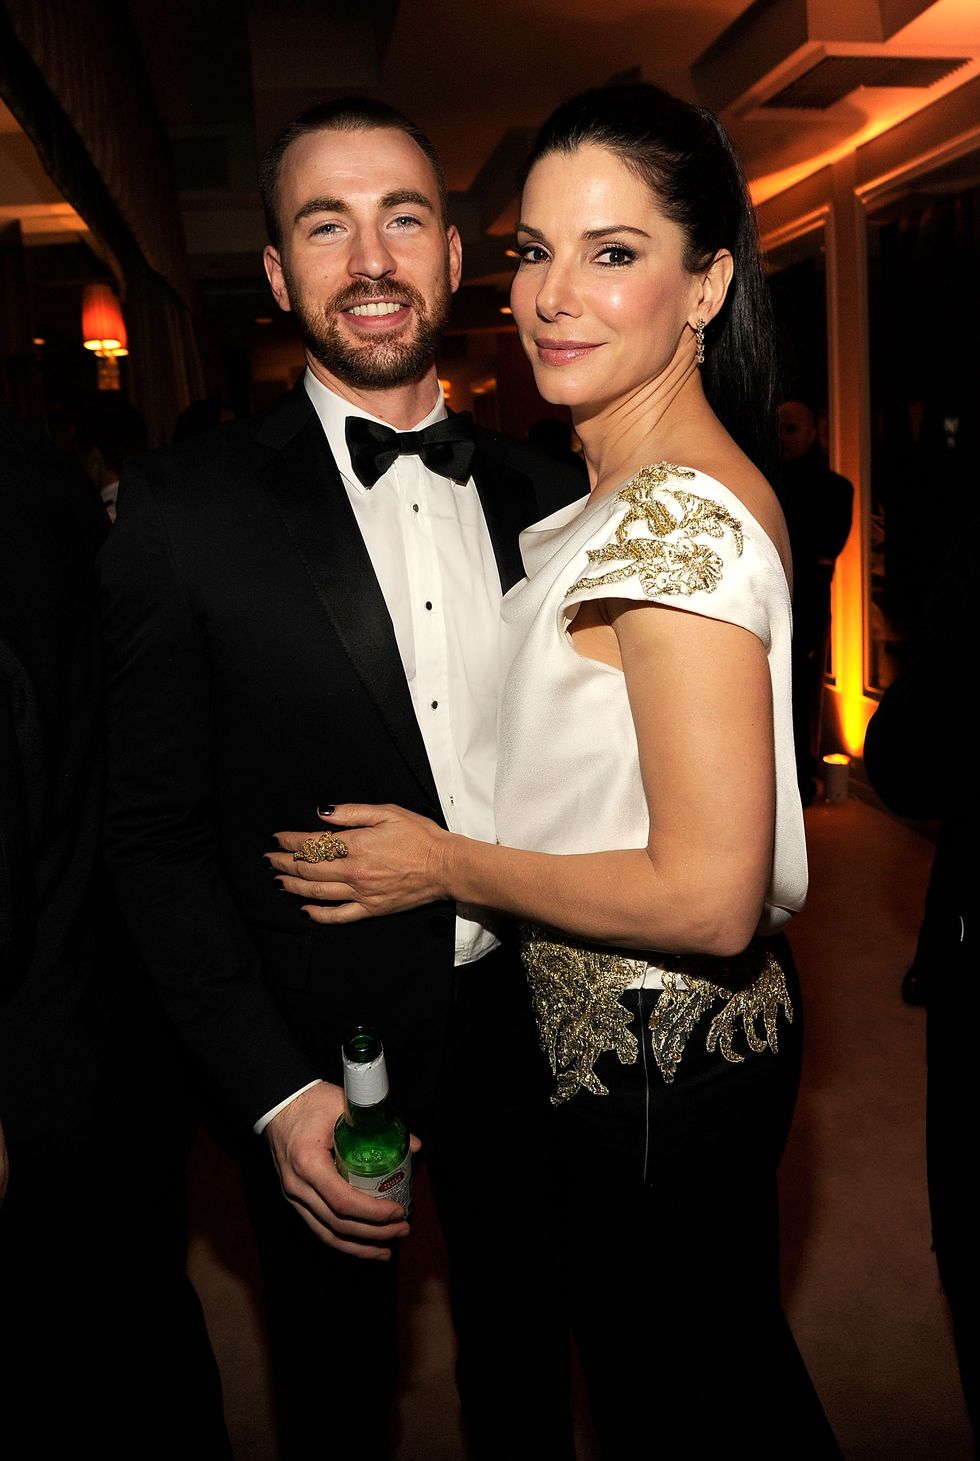 west hollywood, ca   february 26  exclusive access special rates apply no north american on air broadcast until march 1, 2012 chris evans and sandra bullock attend the 2012 vanity fair oscar party hosted by graydon carter at sunset tower on february 26, 2012 in west hollywood, california  photo by kevin mazurvf12wireimage